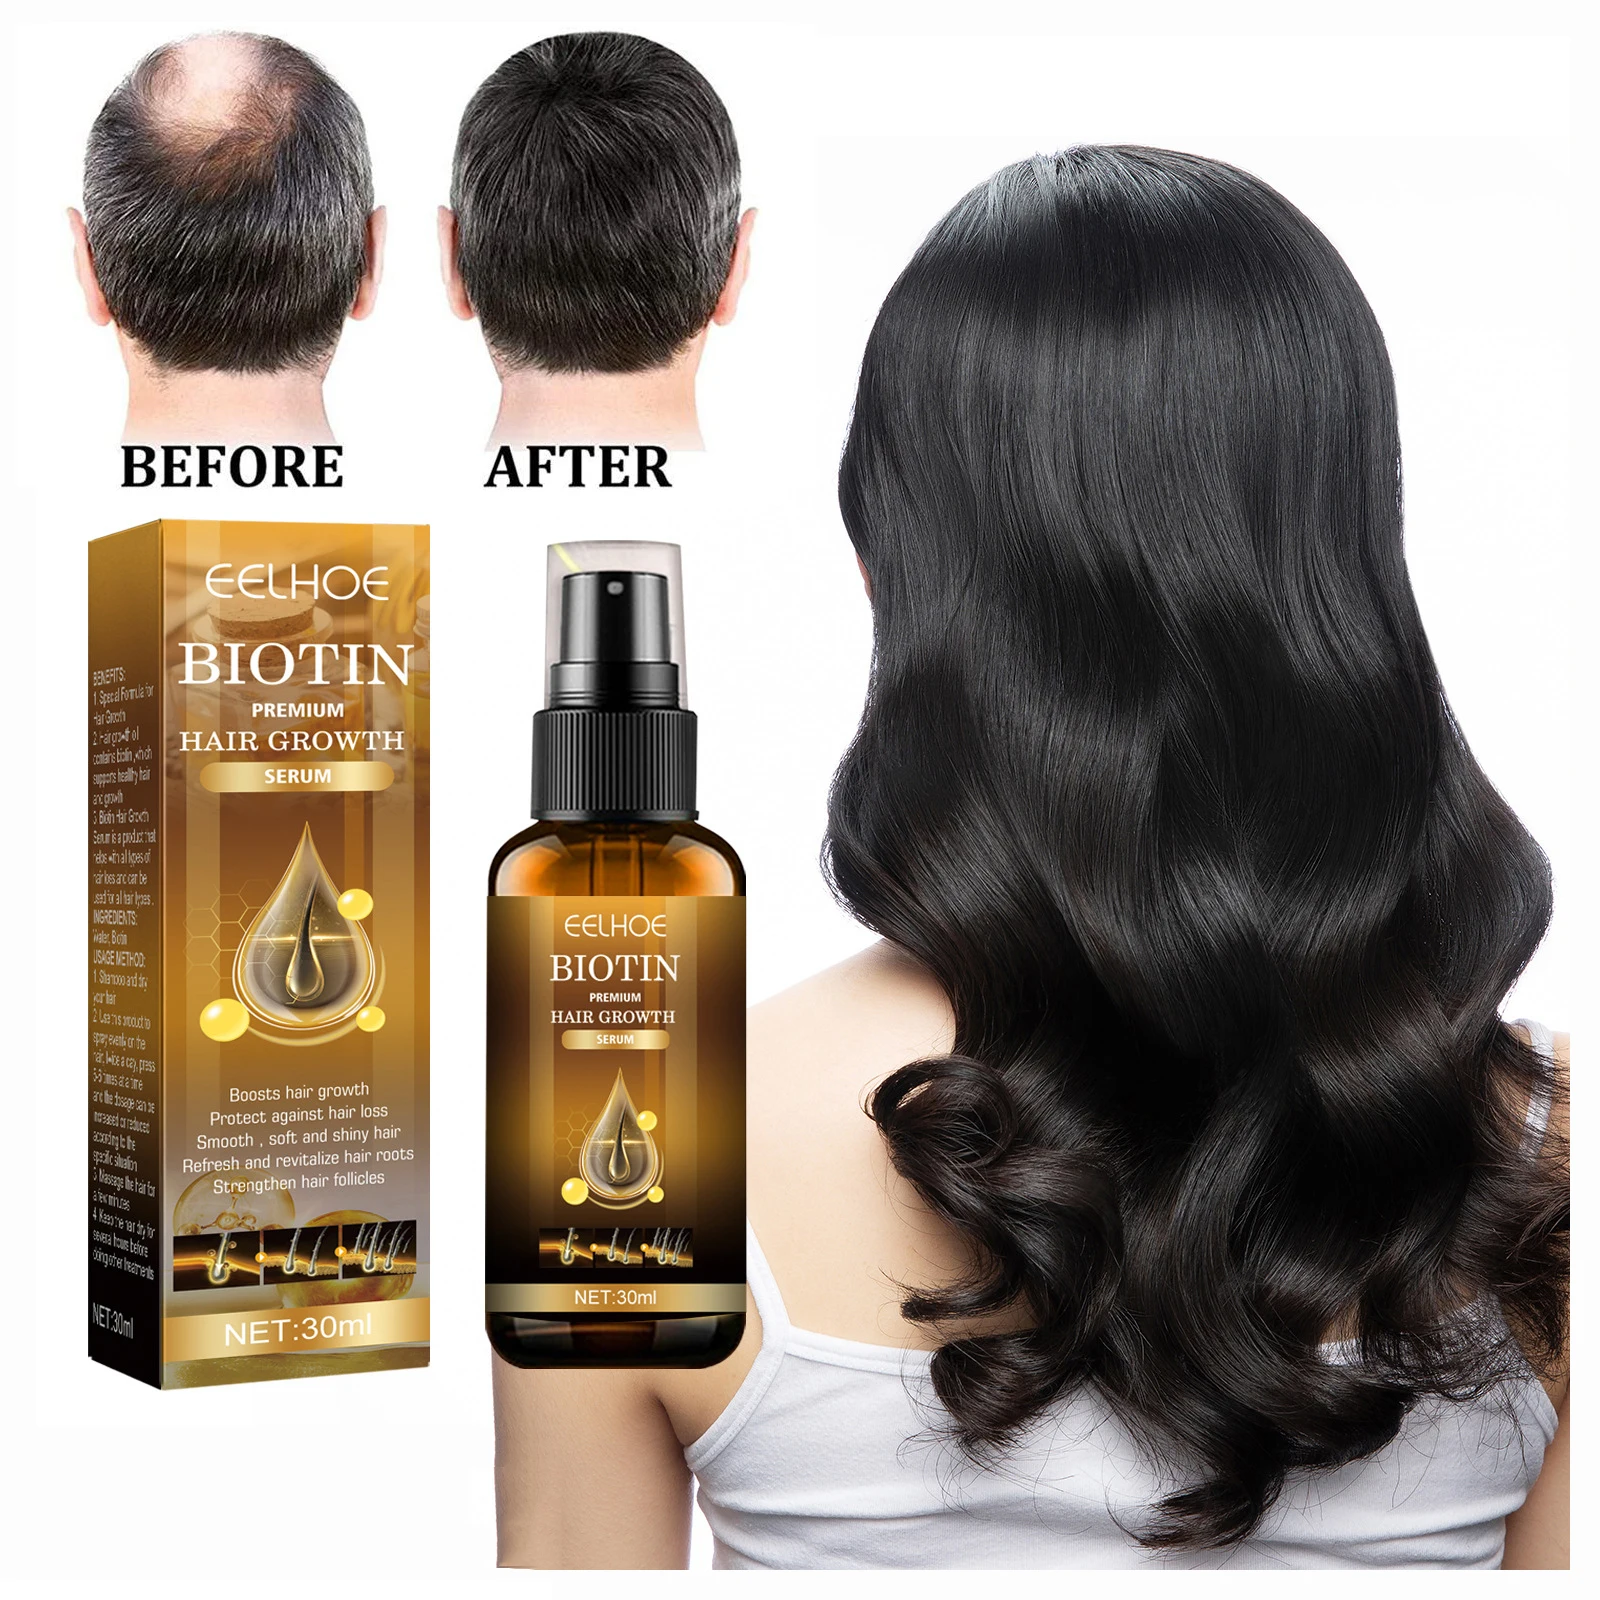 

Effective Hair Growth Products Biotin Anti Hair Loss Spray Scalp Treatment Fast Growing Hair Care Essential Oils For Men Women